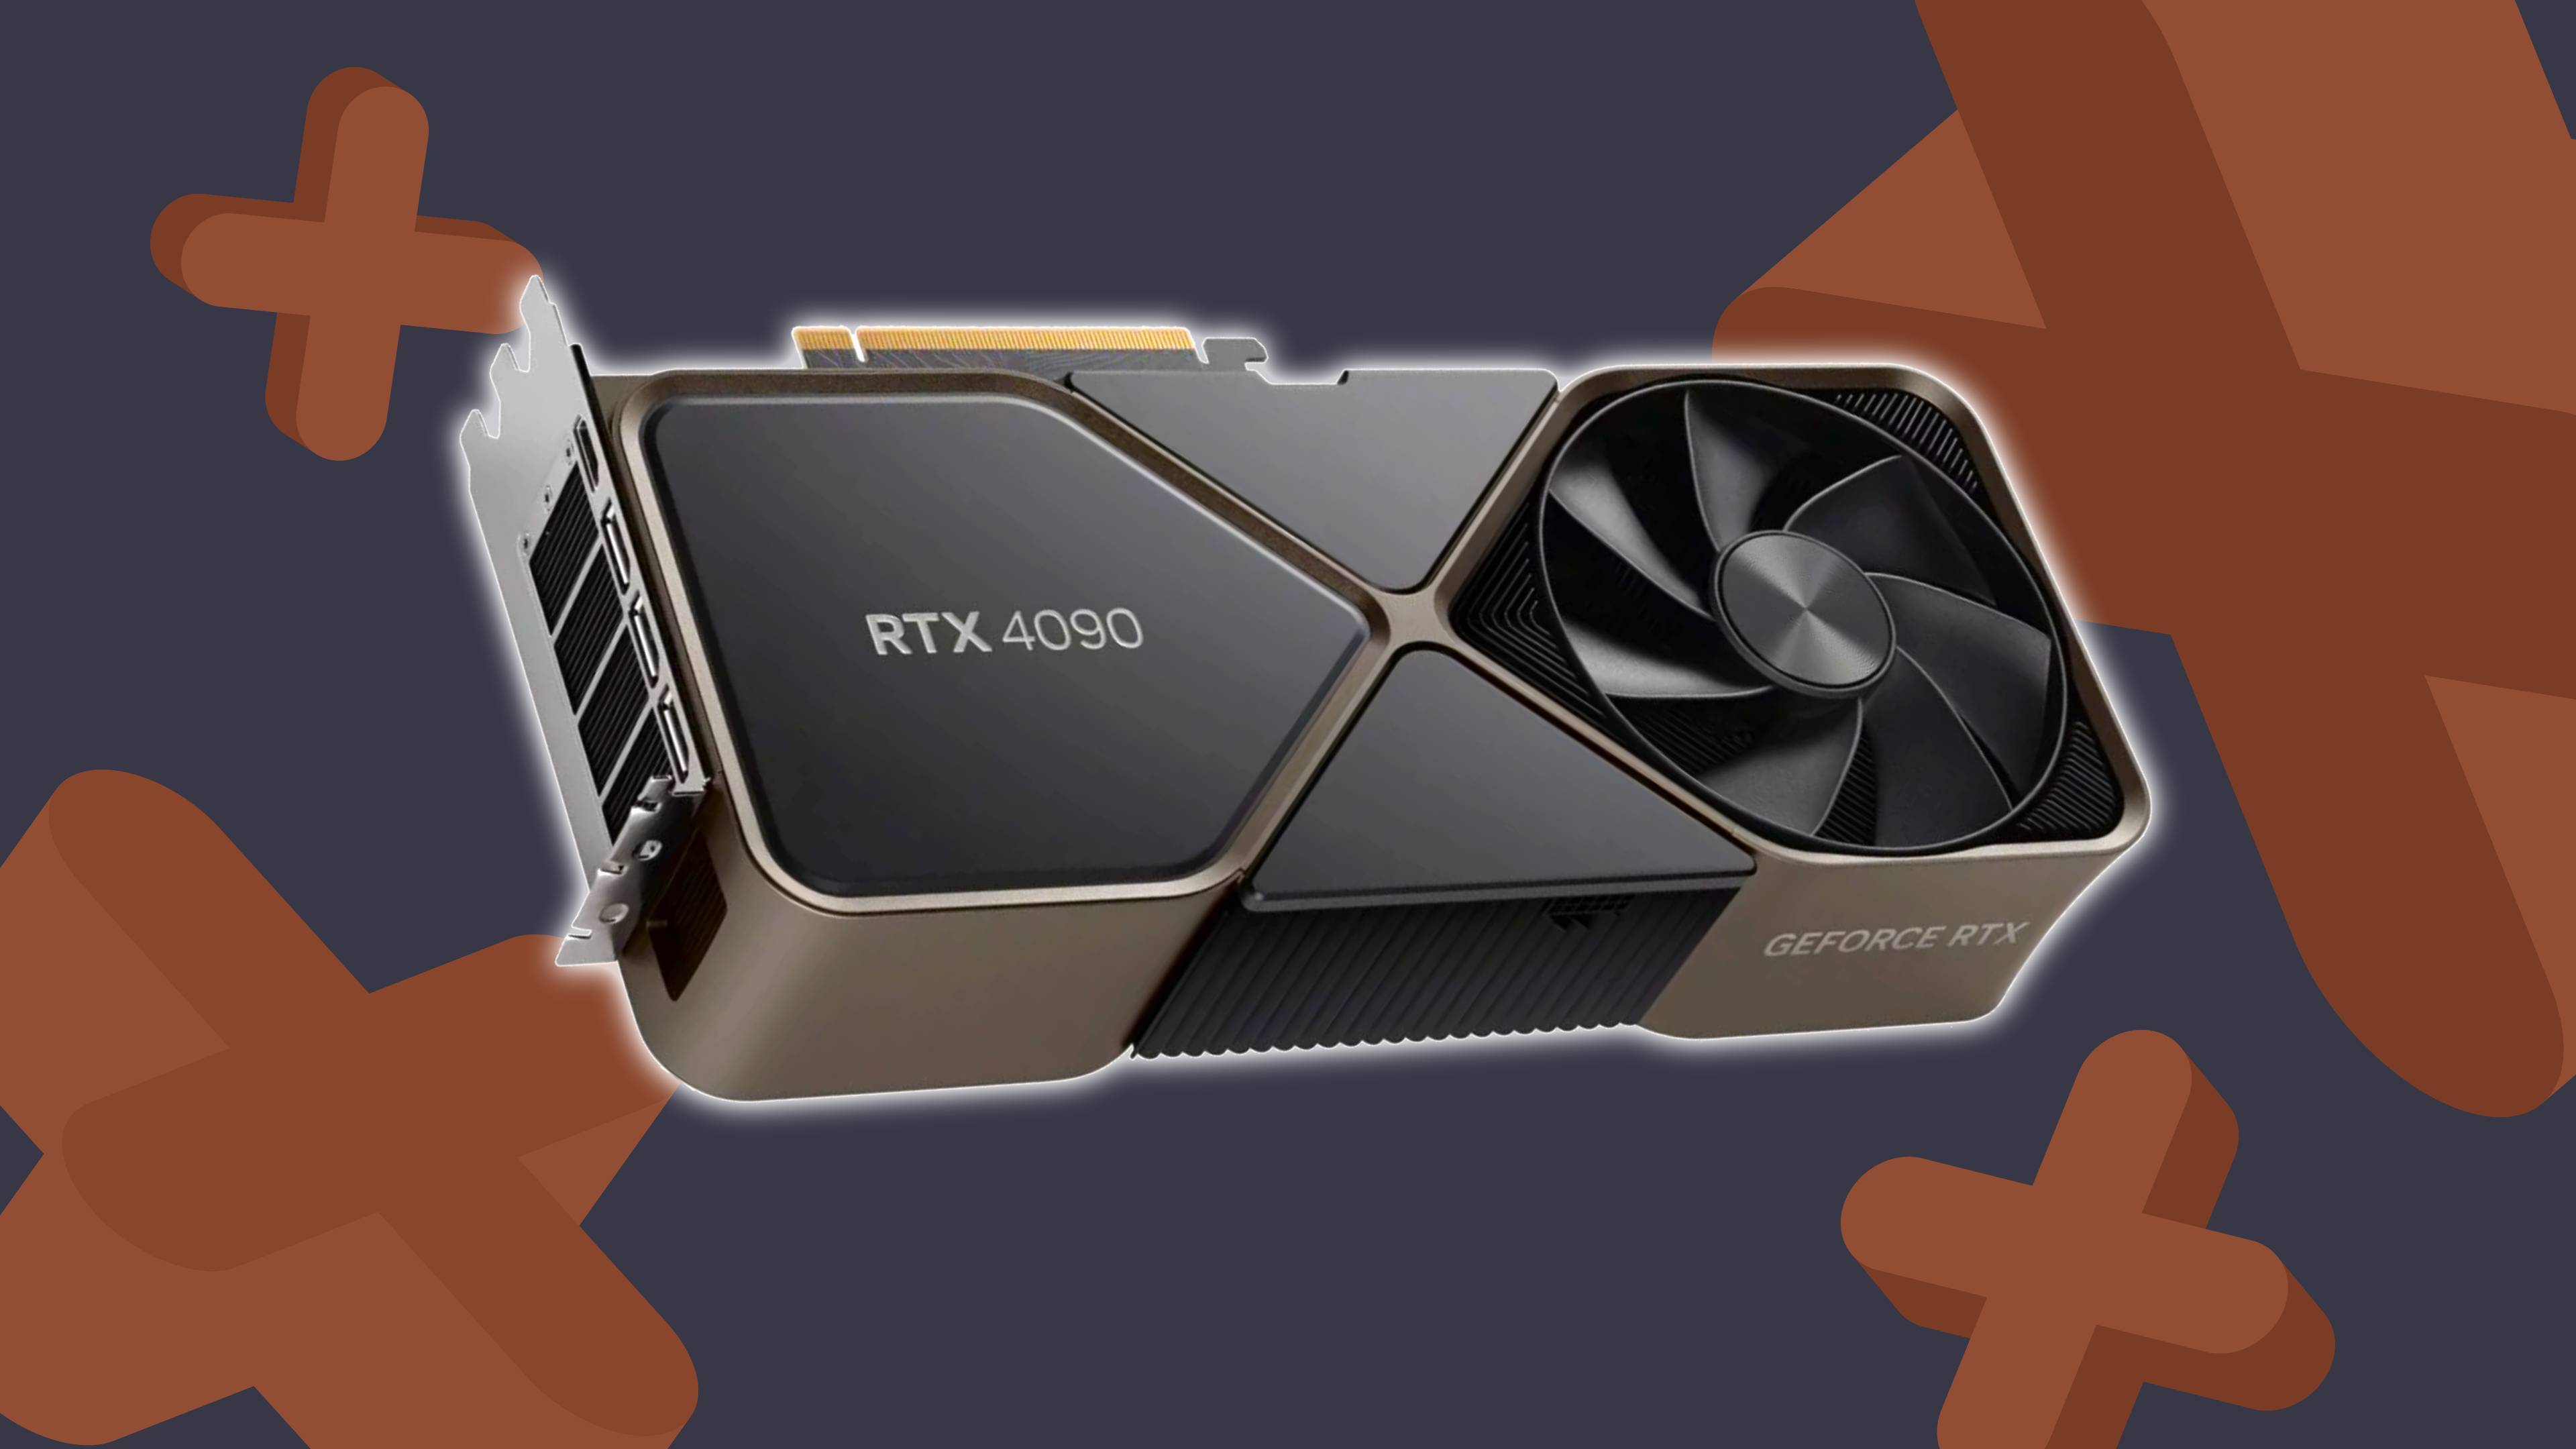 Nvidia GeForce RTX 2080 Ti Founders Edition - Review 2018 - PCMag UK